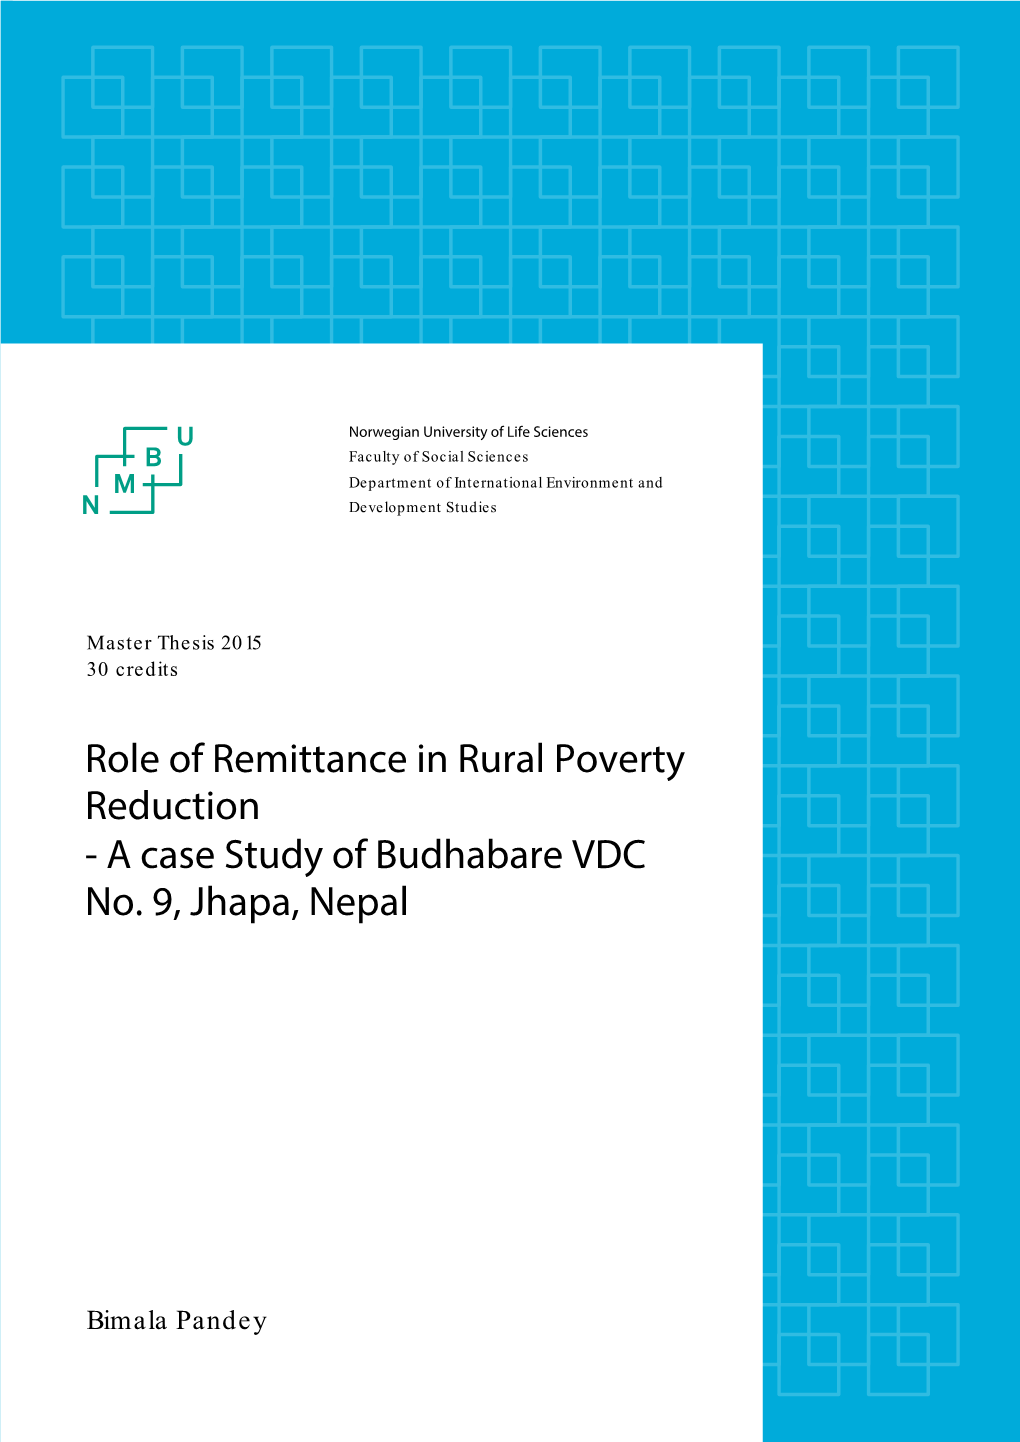 Role of Remittance in Rural Poverty Reduction a Case Study of Budhabare Vdc Ward No.9, Jhapa, Nepal